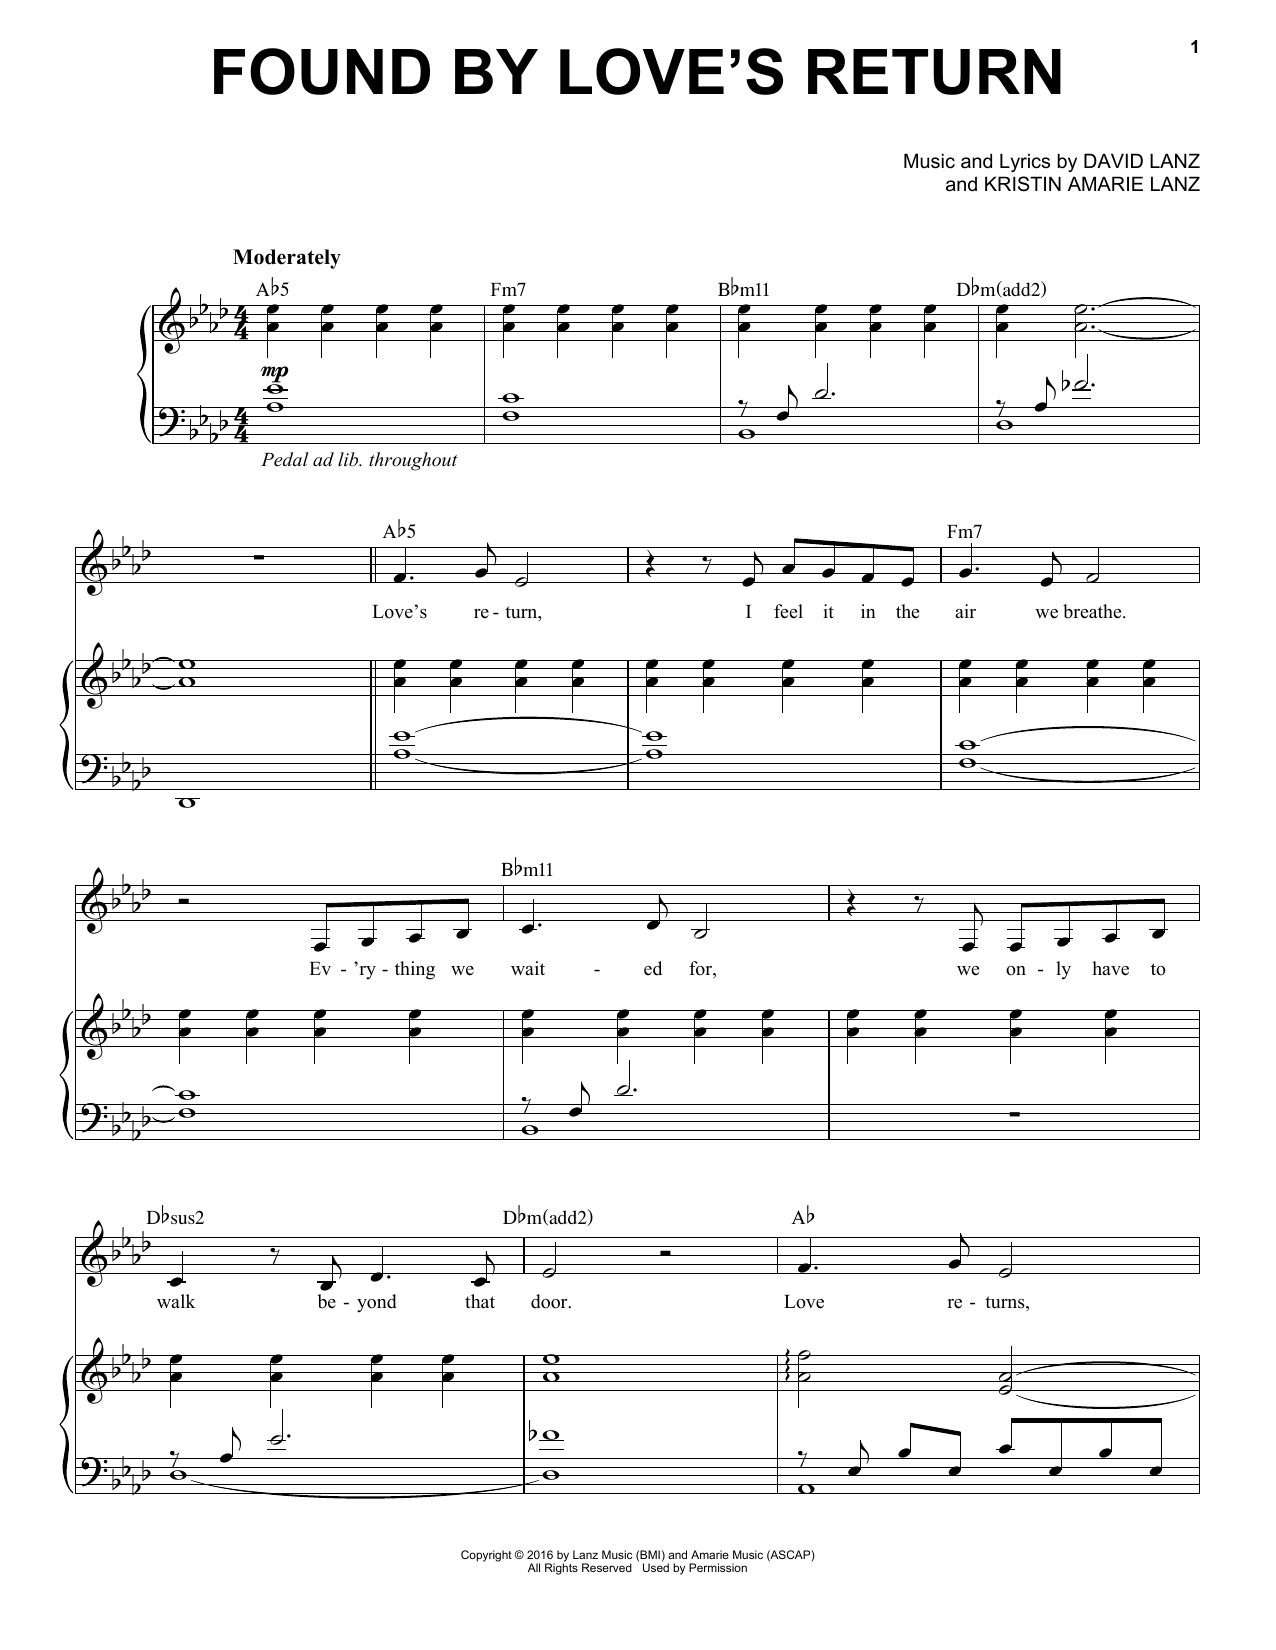 David Lanz & Kristin Amarie Found by Love's Return sheet music notes and chords. Download Printable PDF.